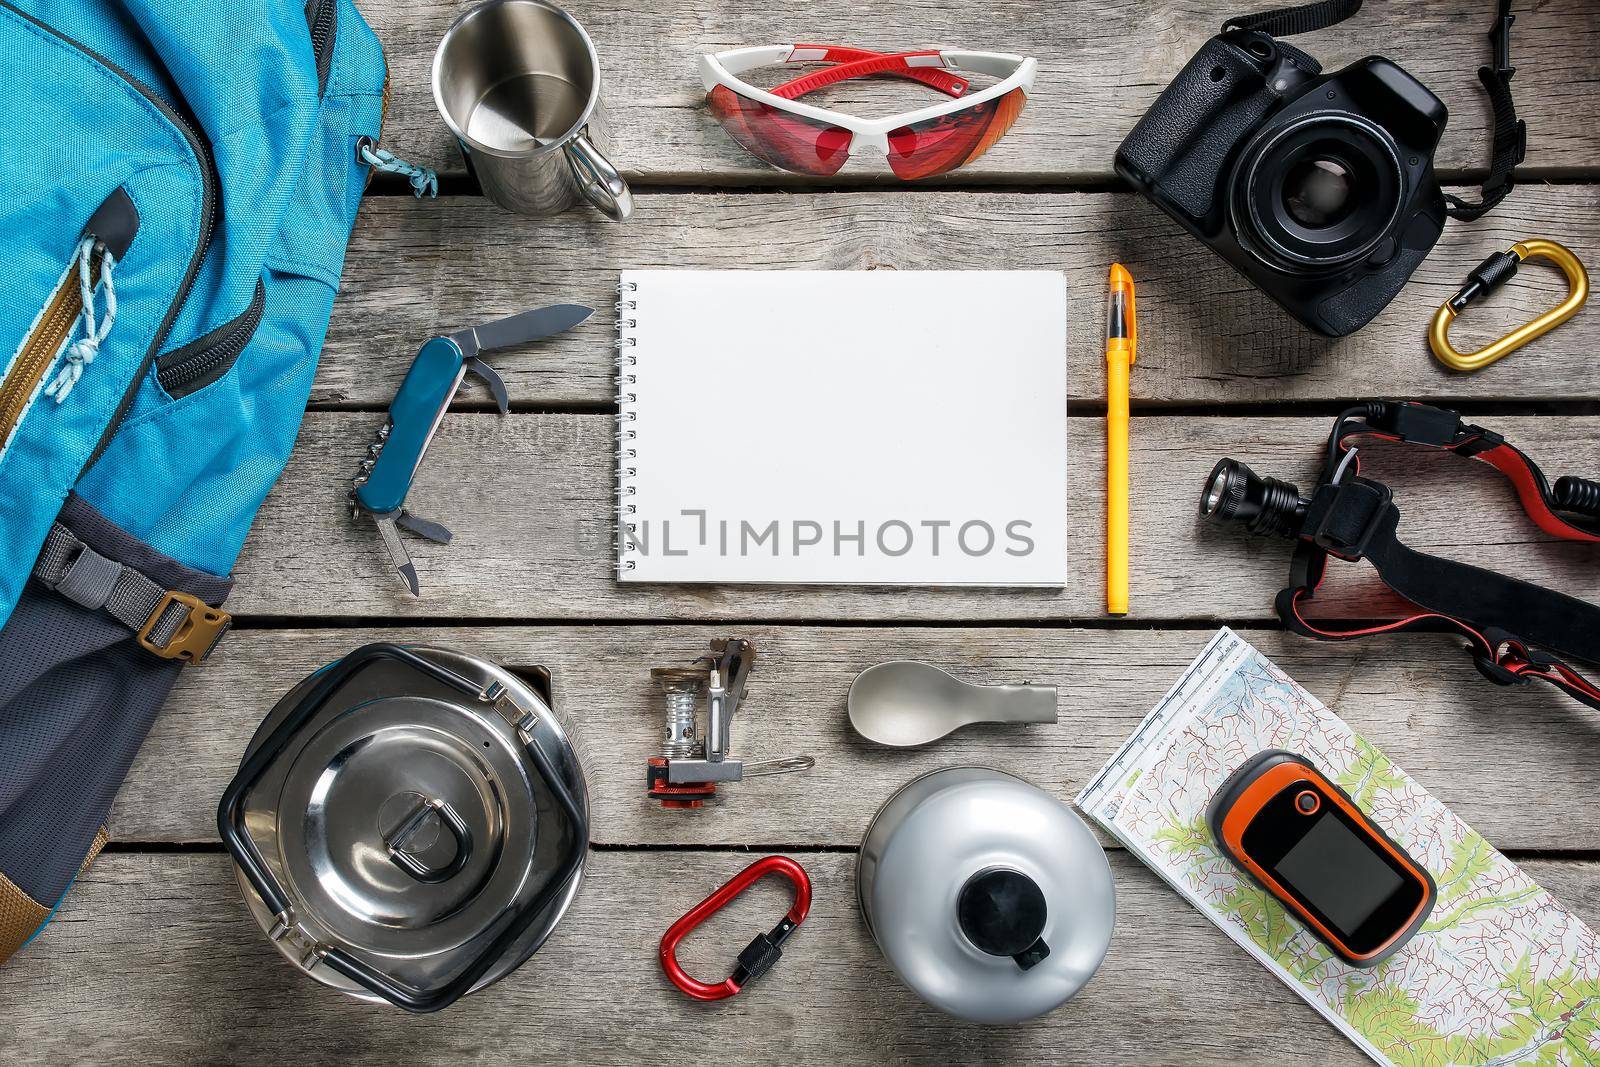 Tourist equipment for travel and tourism on a light wooden floor with an empty space in the middle. Card, knife, rope, carbine, flashlight, shoes, GPS, burner, mug, camera, glasses, backpack.